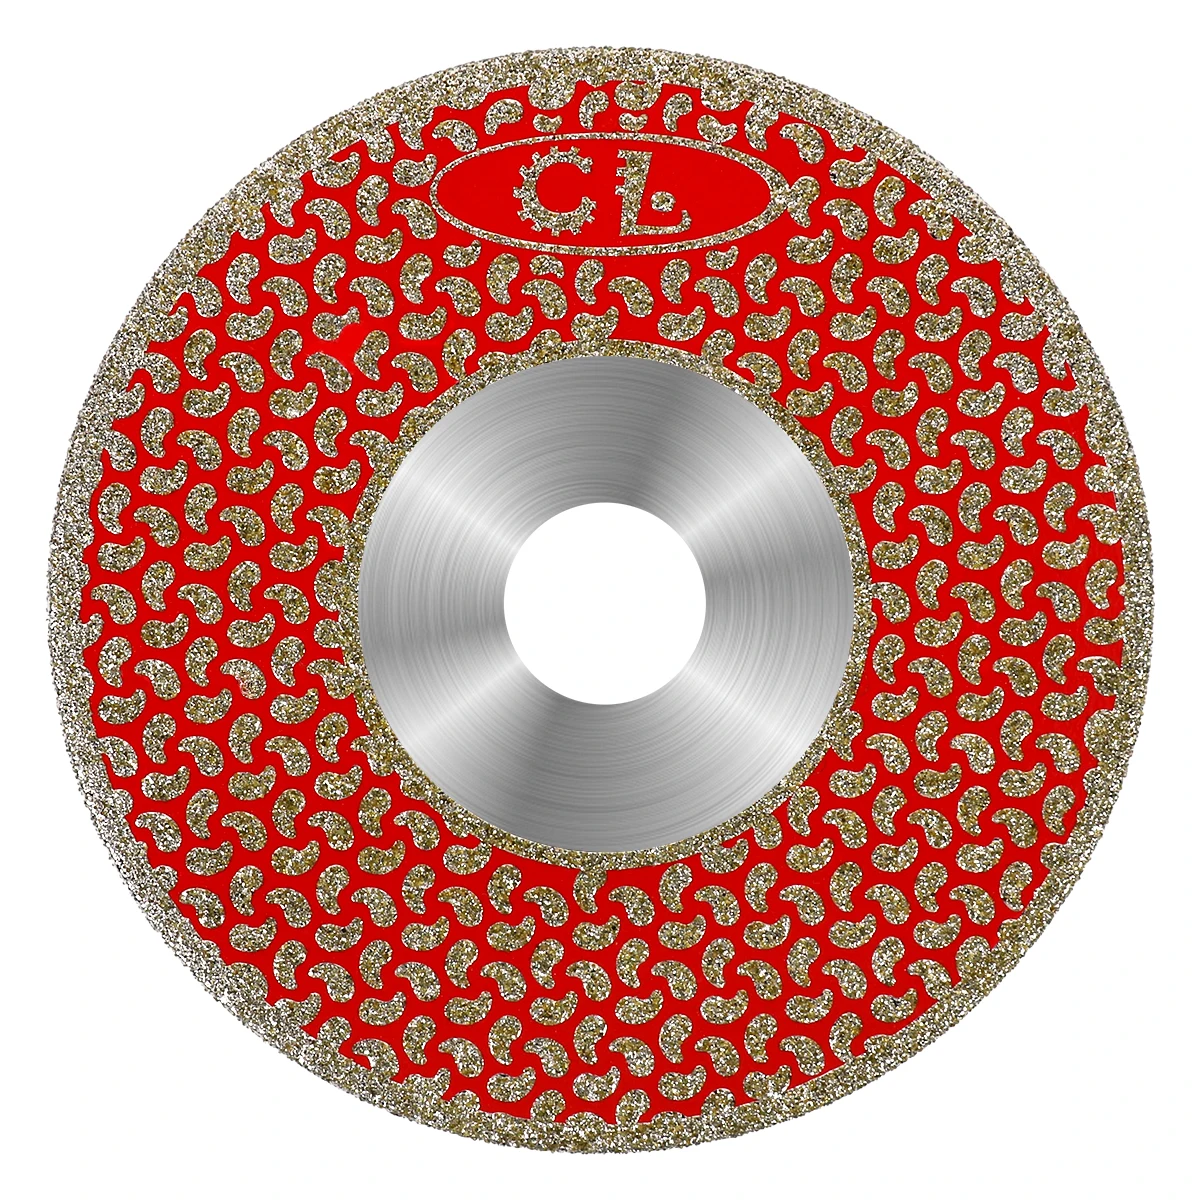 

125mm Electroplated Diamond Cutting Disc Wheel Grinding Saw Blade Both Sides Coated Galvanized For Marble Granite Ceramic Tile